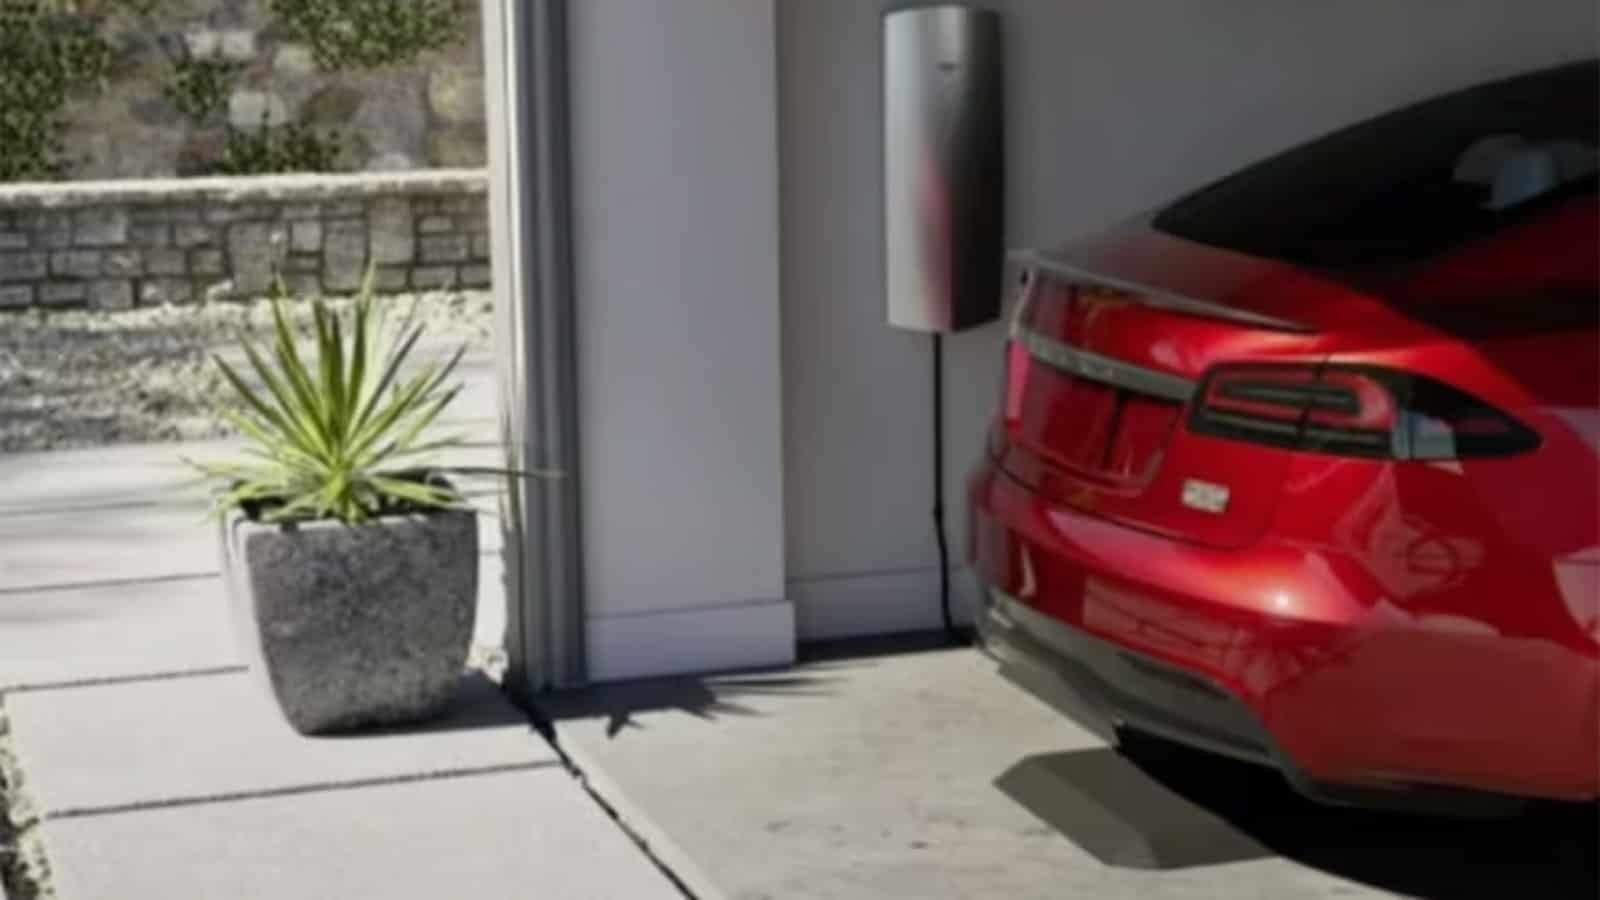 Image showcasing Tesla wireless home charger and charging pad